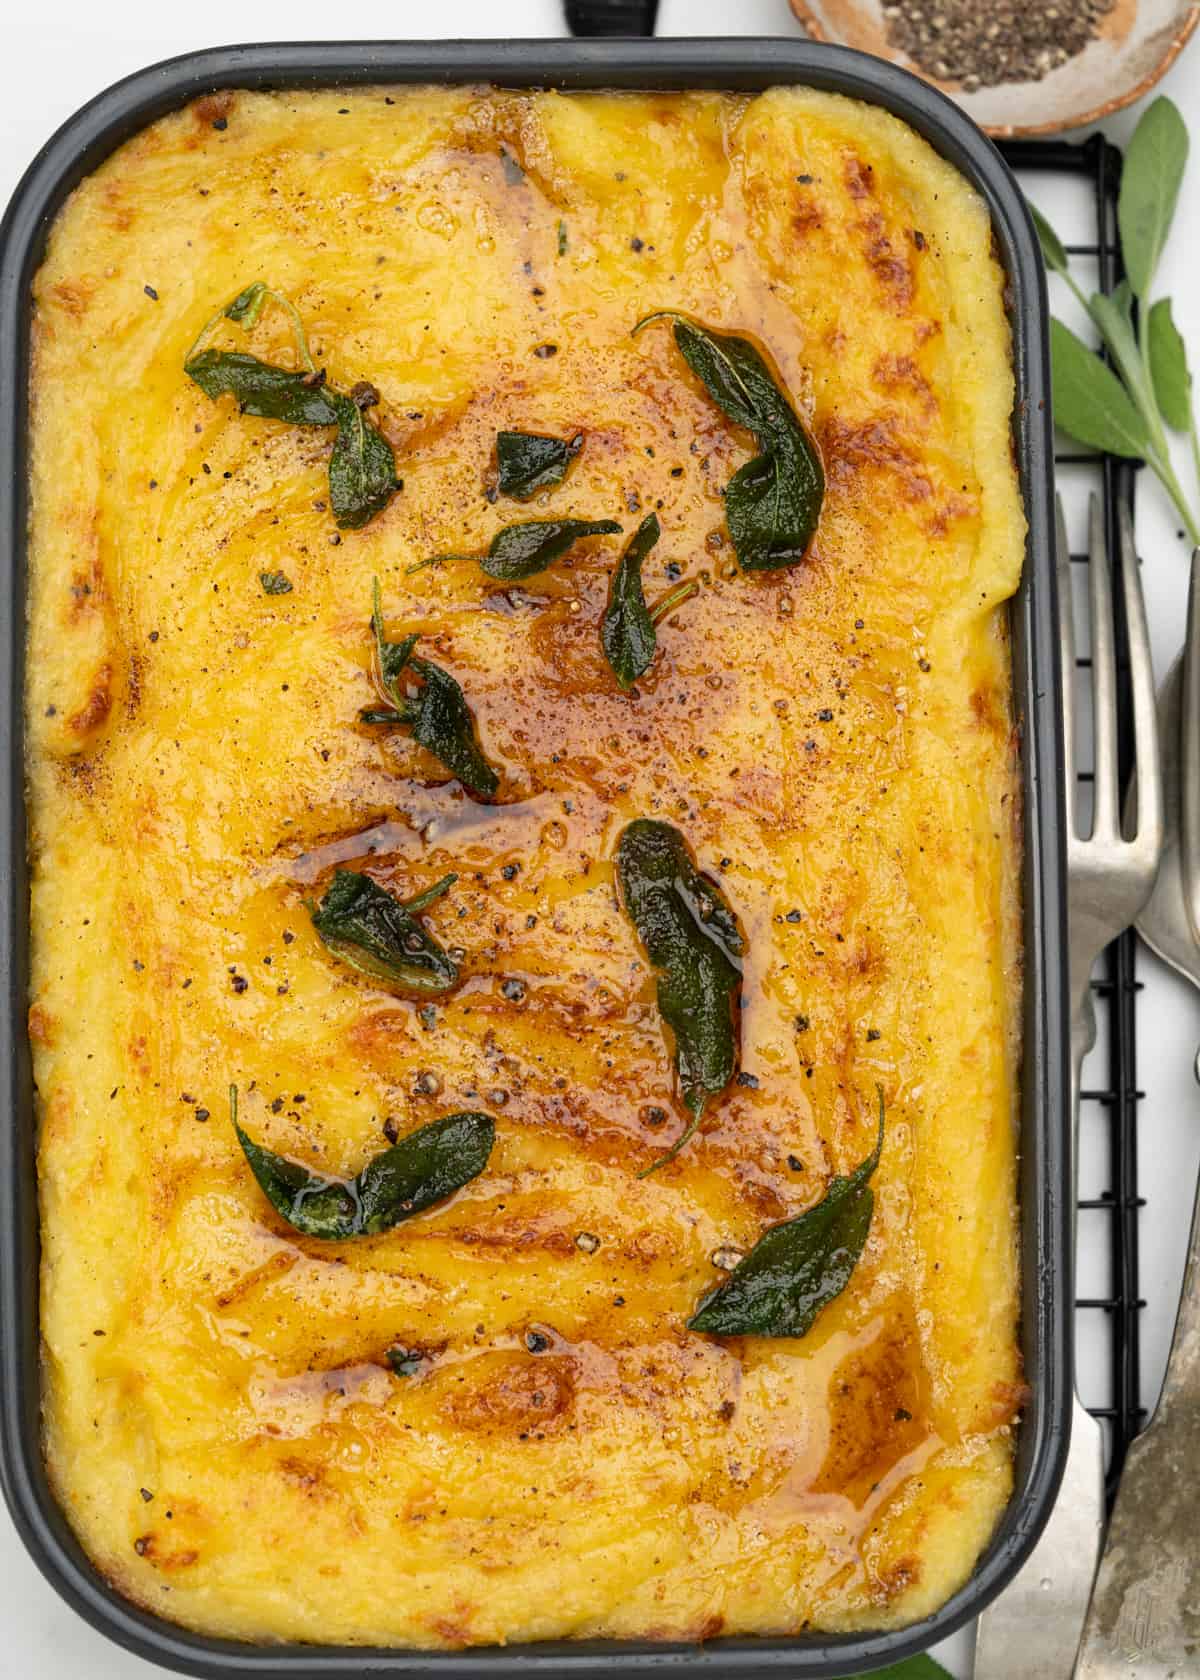  creamy fluffy mashed potato with lots of cheese is baked into a casserole. Top it with brown butter and crispy sage